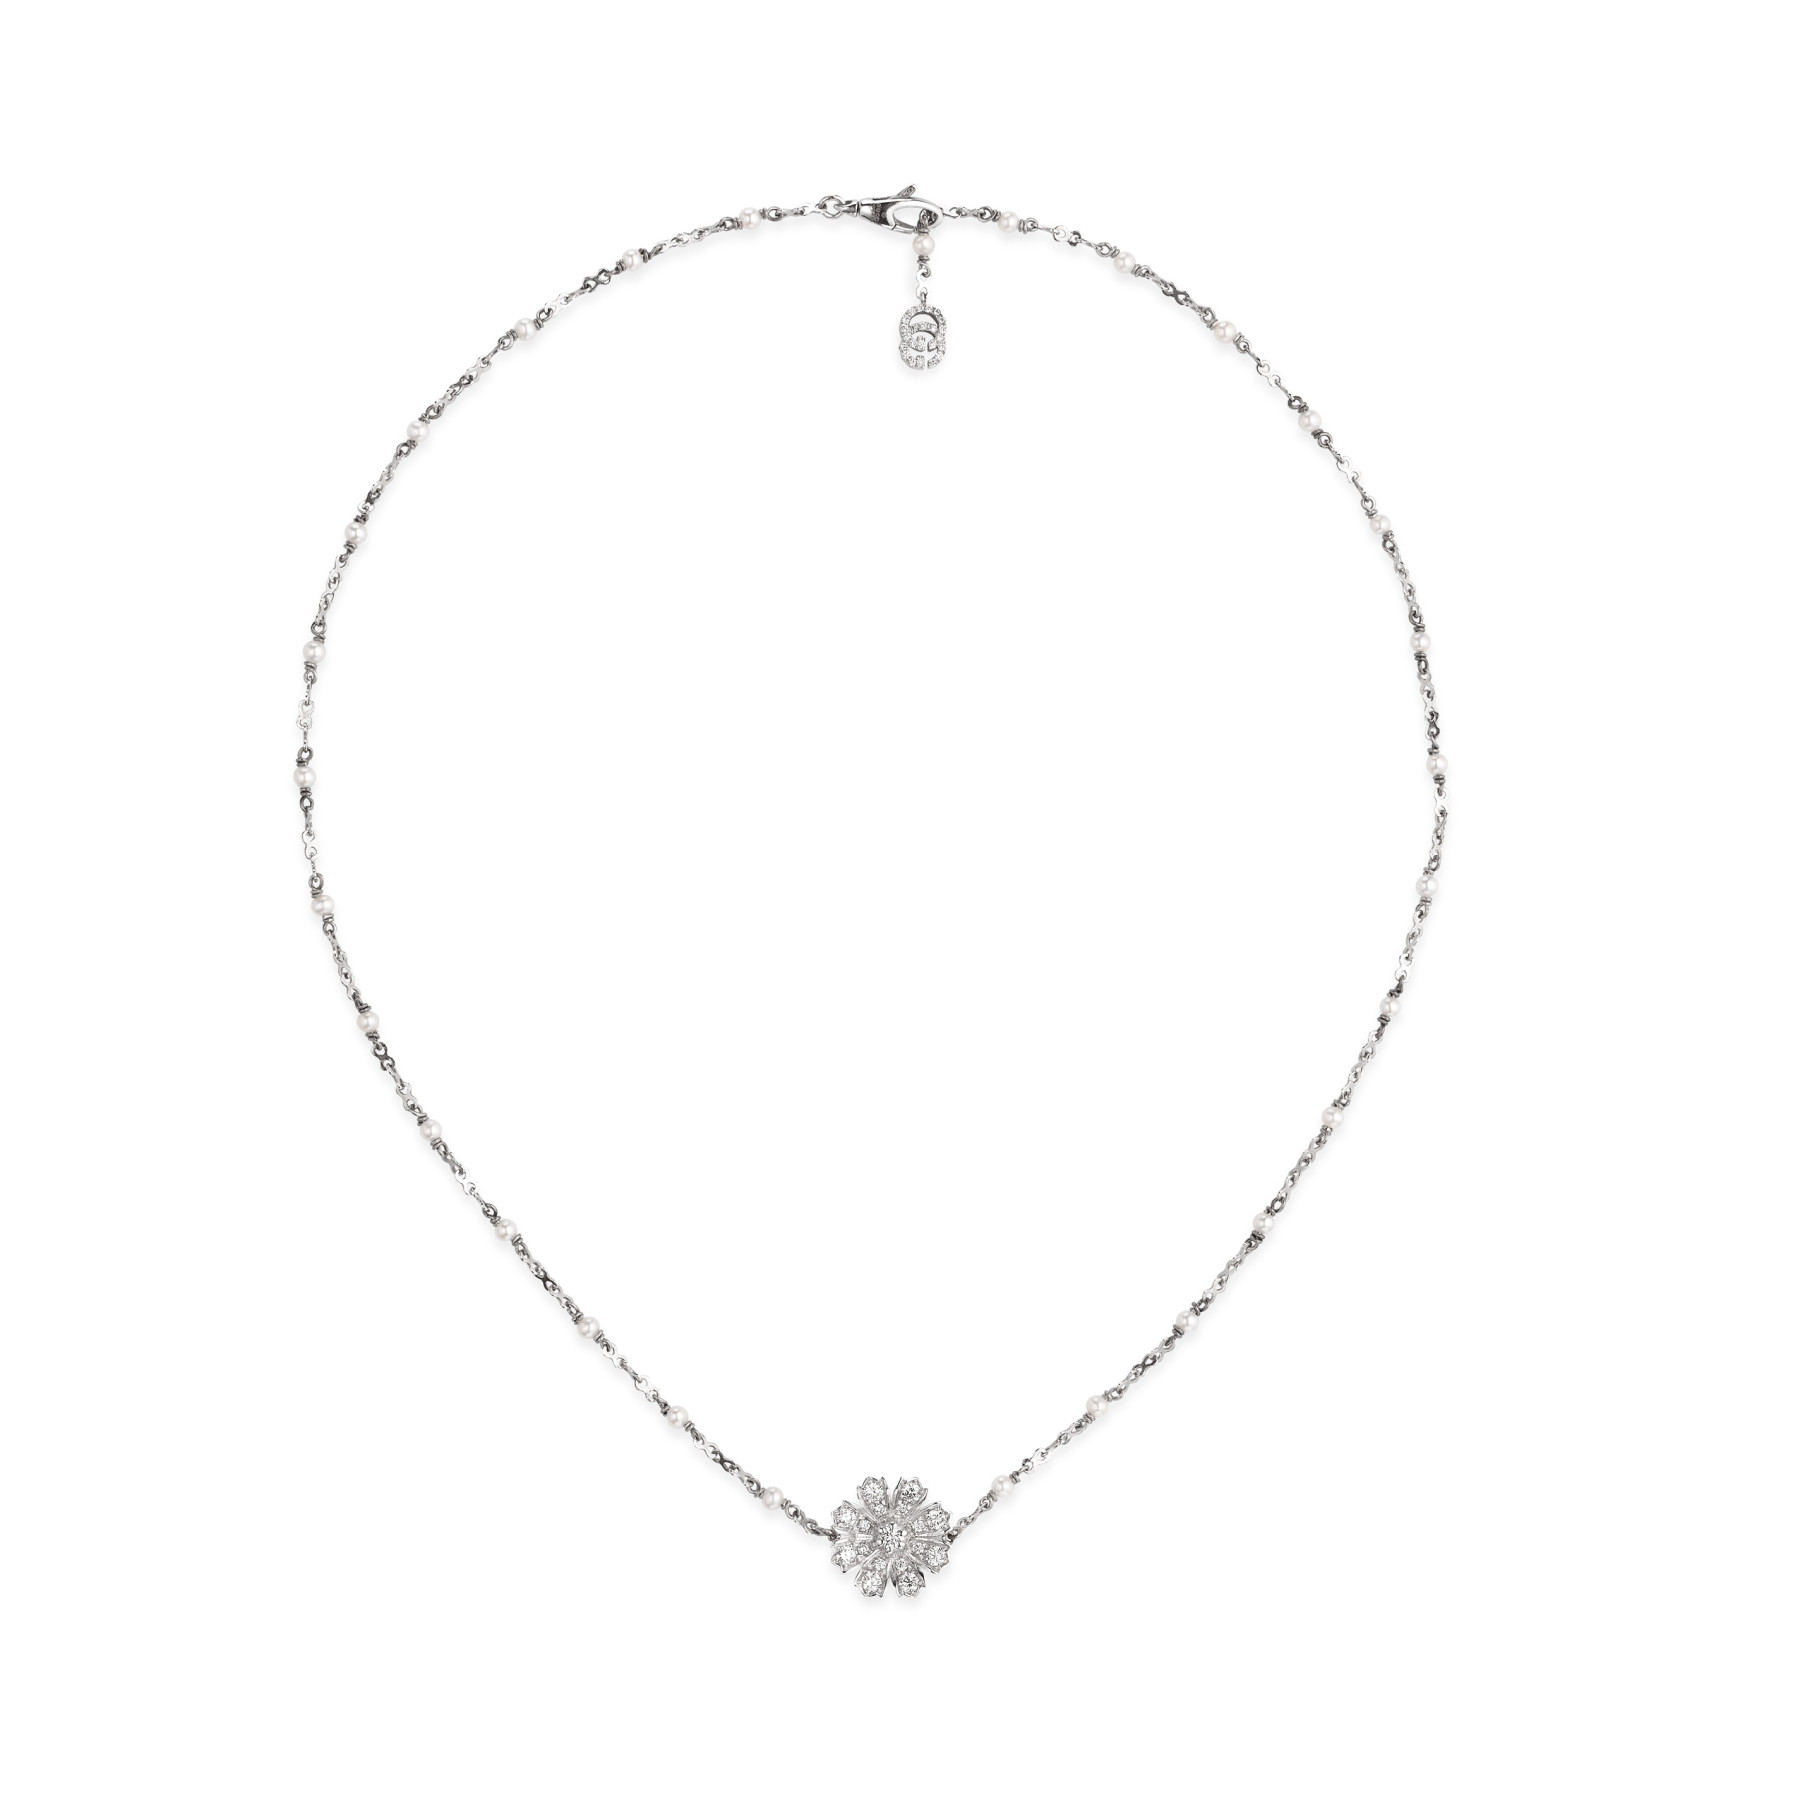 Gucci Flora Diamond Pearl Flower Necklace in White Gold